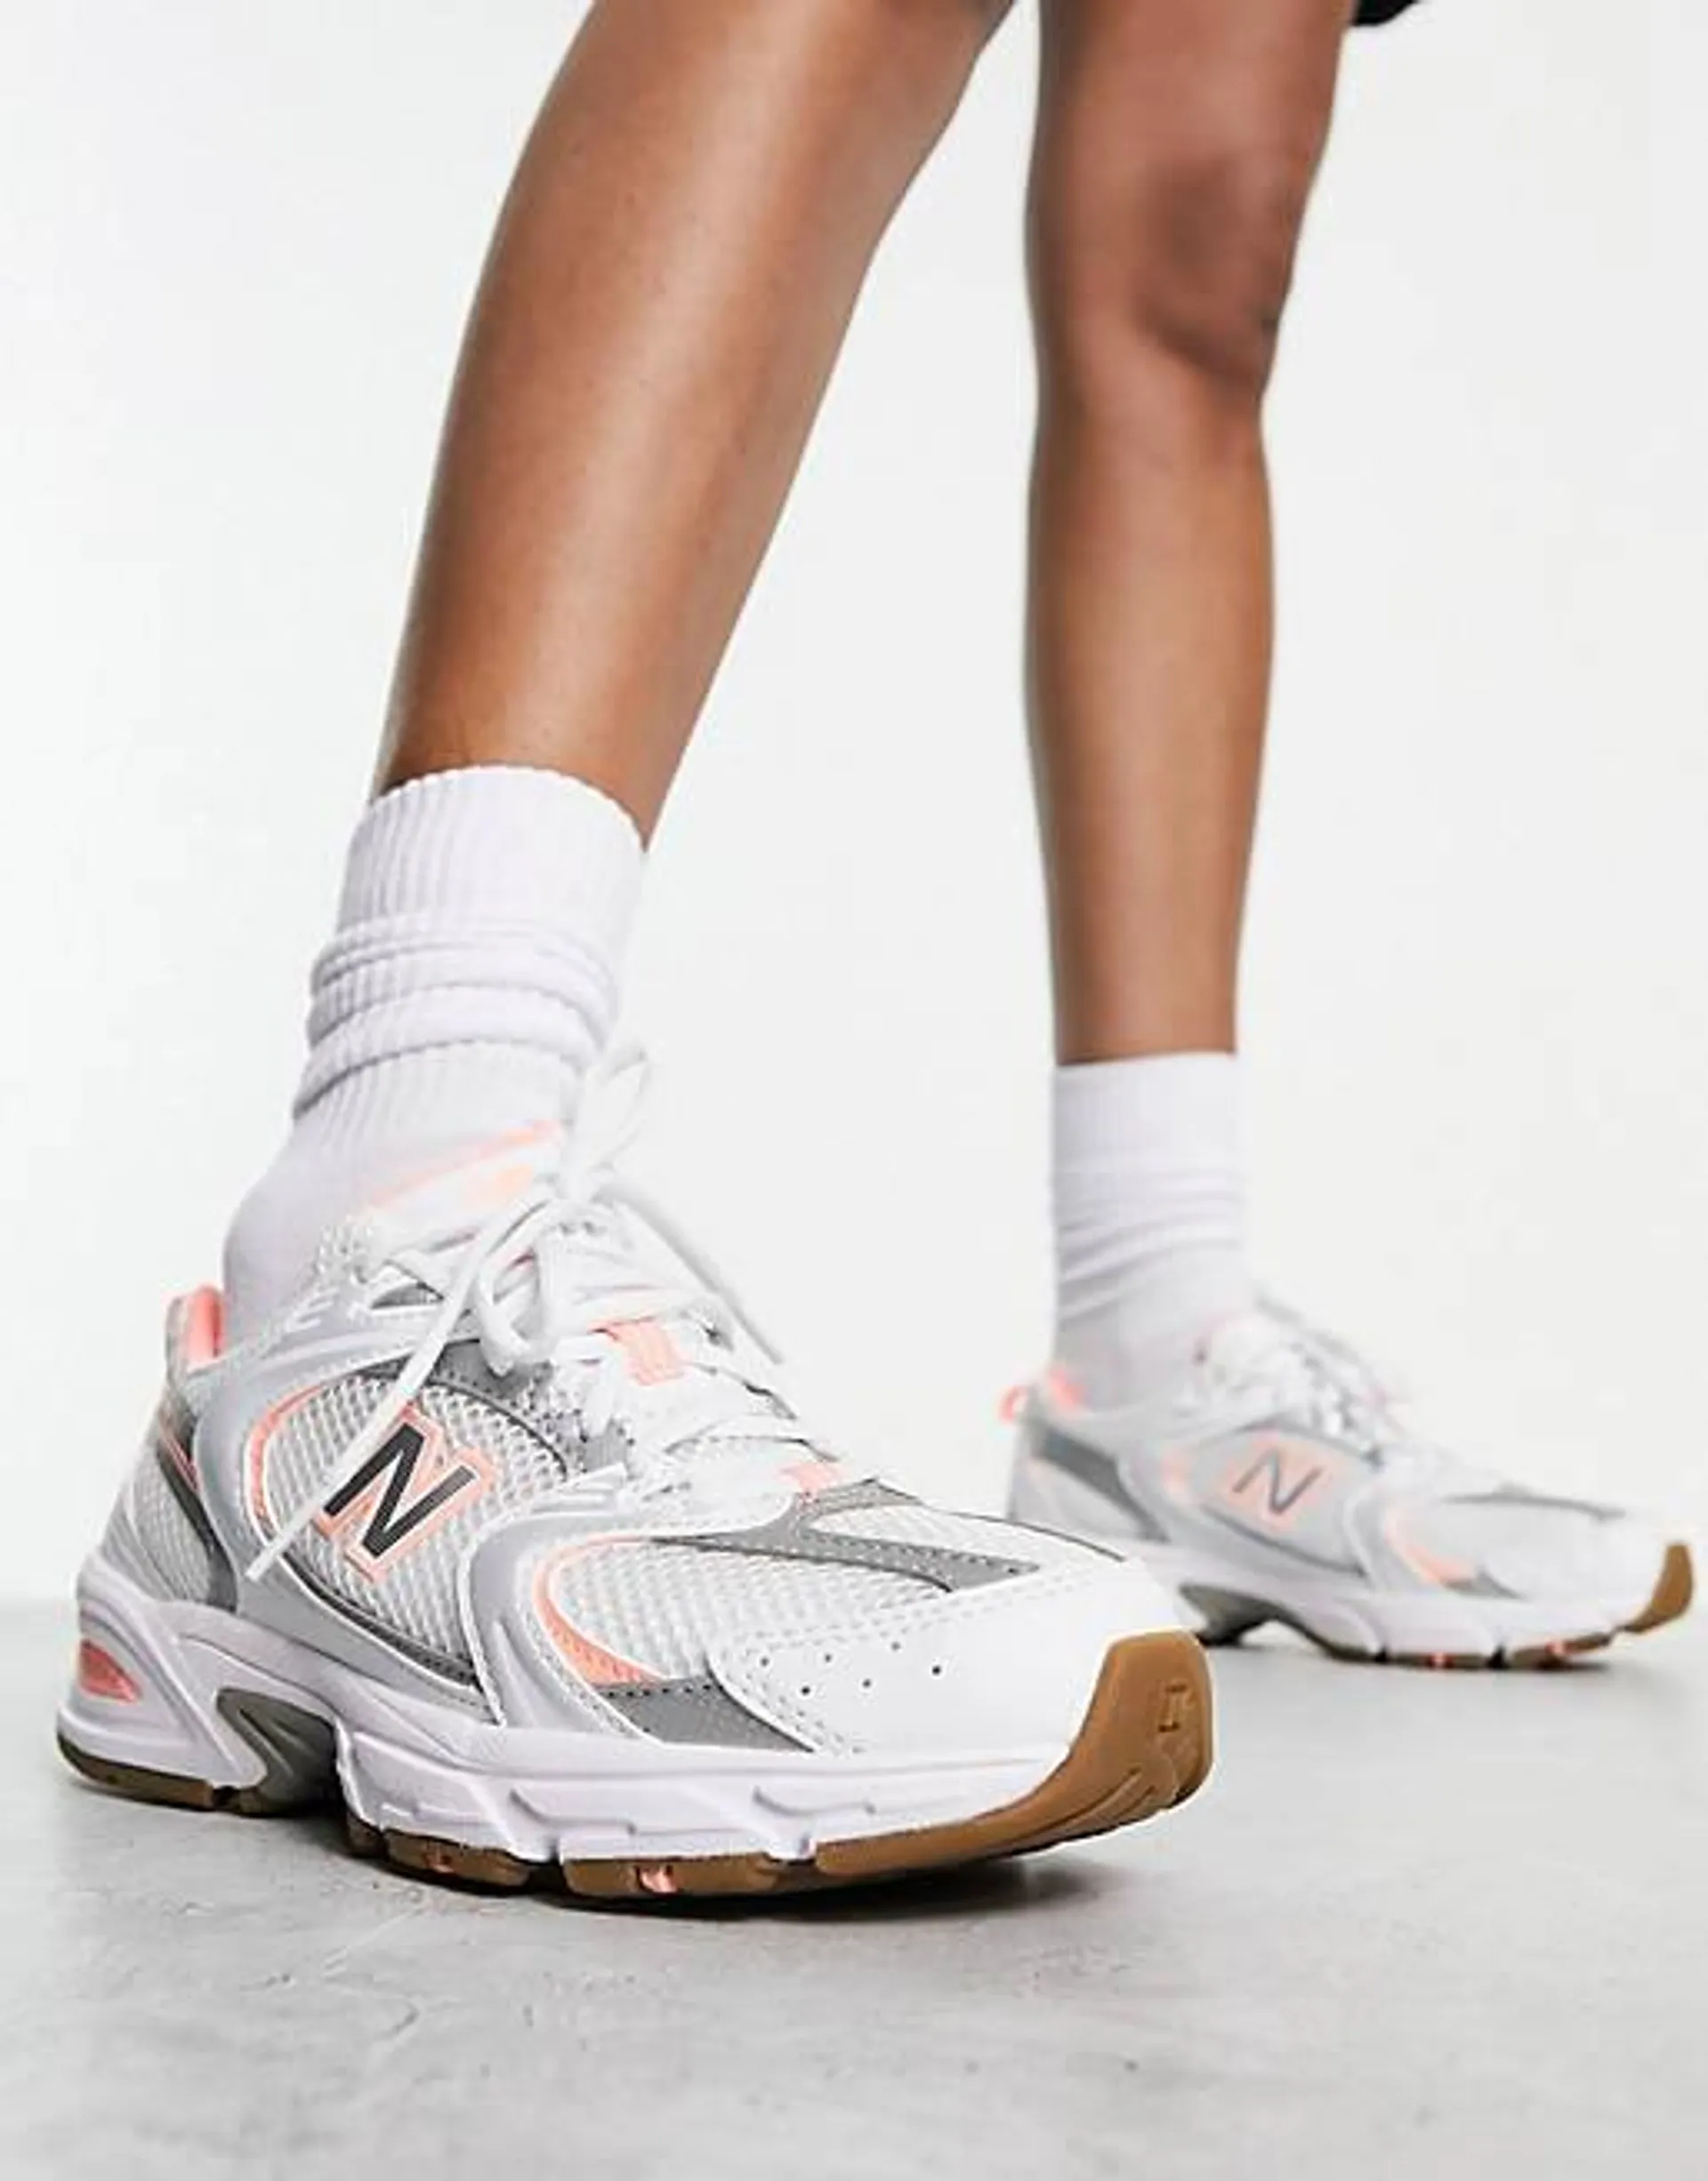 New Balance 530 trainers in white & pink - exclusive to ASOS